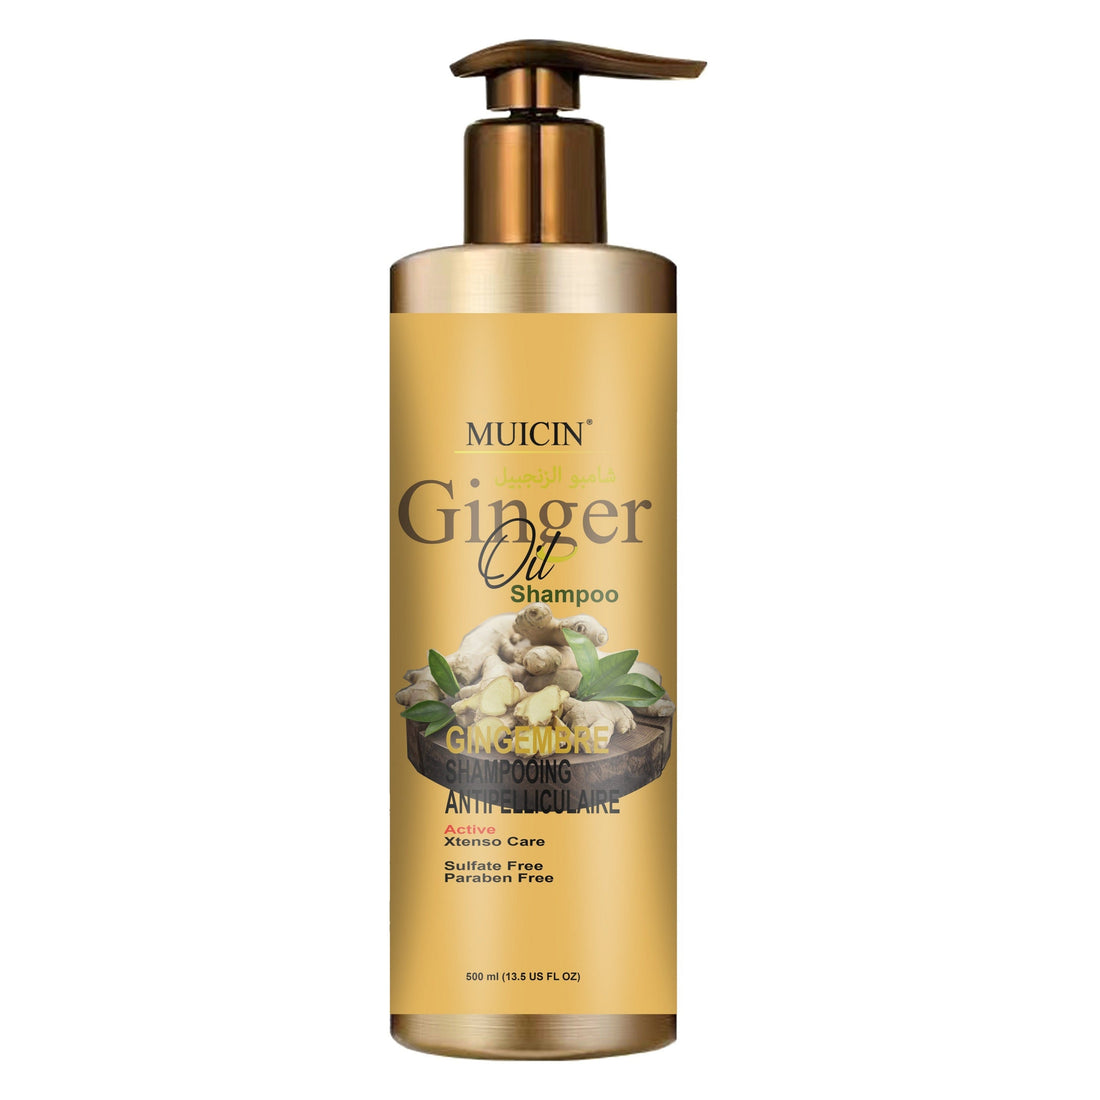 GINGER OIL SHAMPOO XTENSO CARE - SMOOTHING &amp; STRENGTHENING